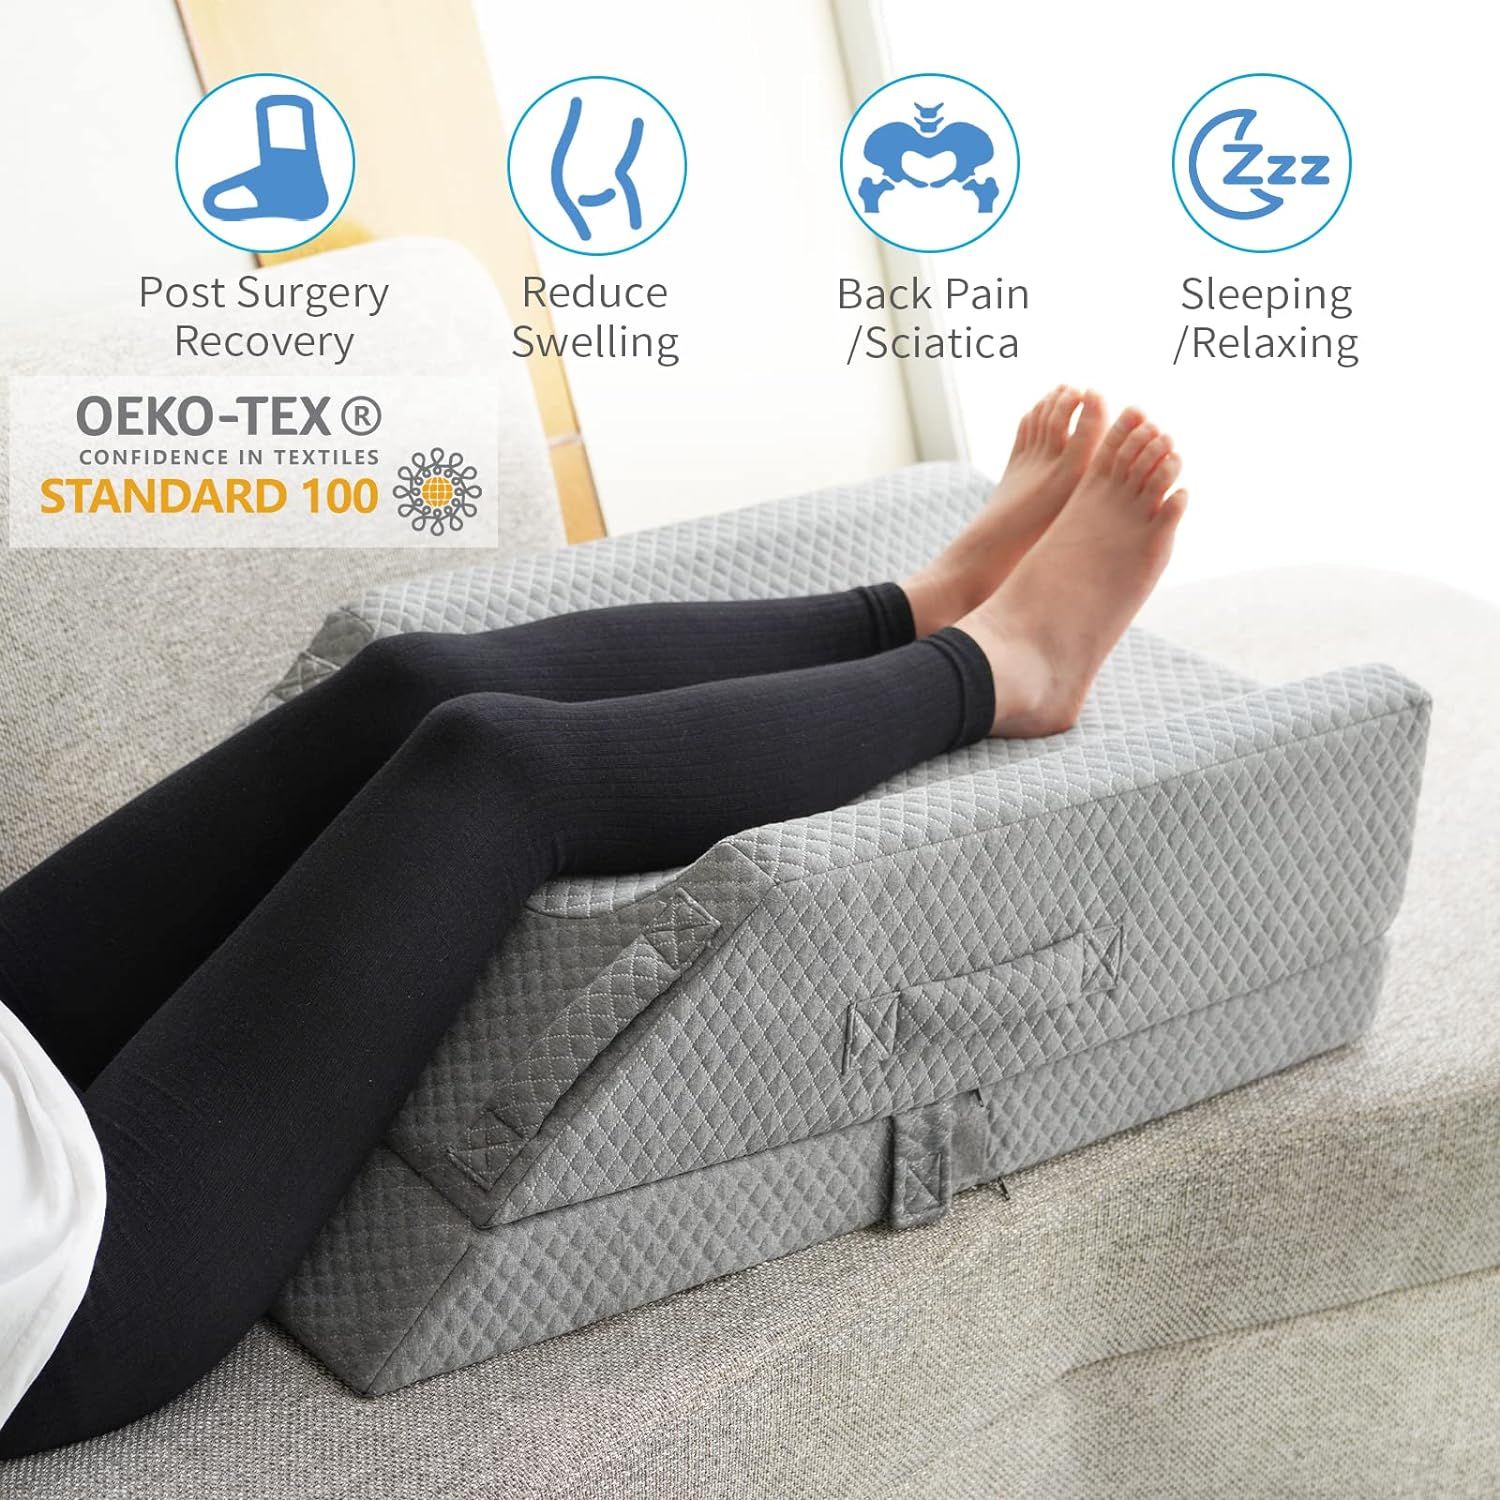 UBBCARE Leg Elevation Pillow for Leg/Knee Surgery Recovery, Memory Foam Leg  Pillow with Velvet Washable Cover, Grey